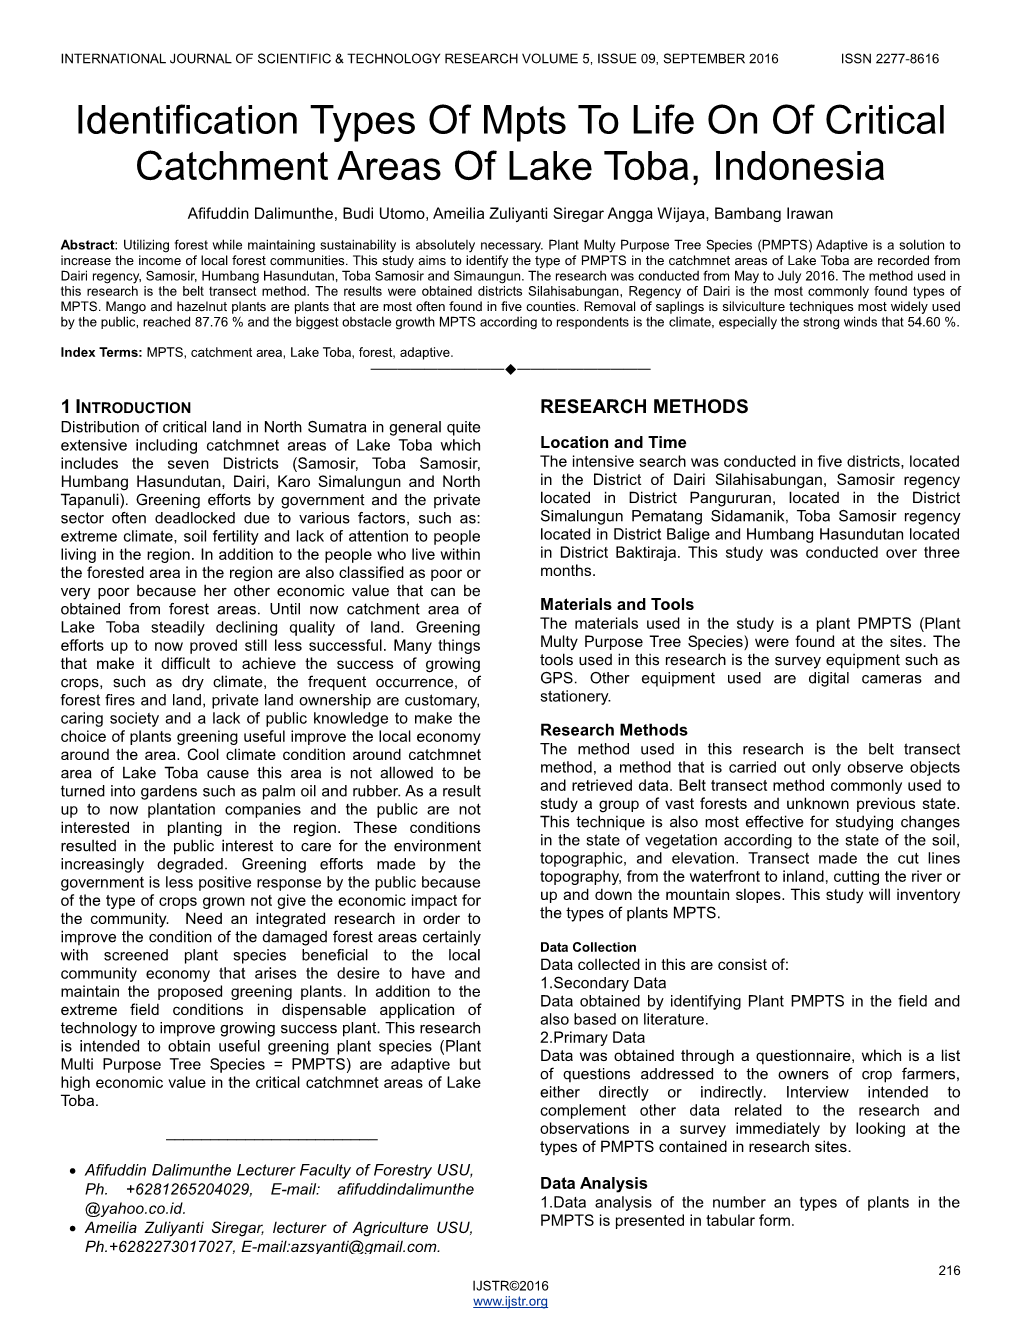 Identification Types of Mpts to Life on of Critical Catchment Areas of Lake Toba, Indonesia